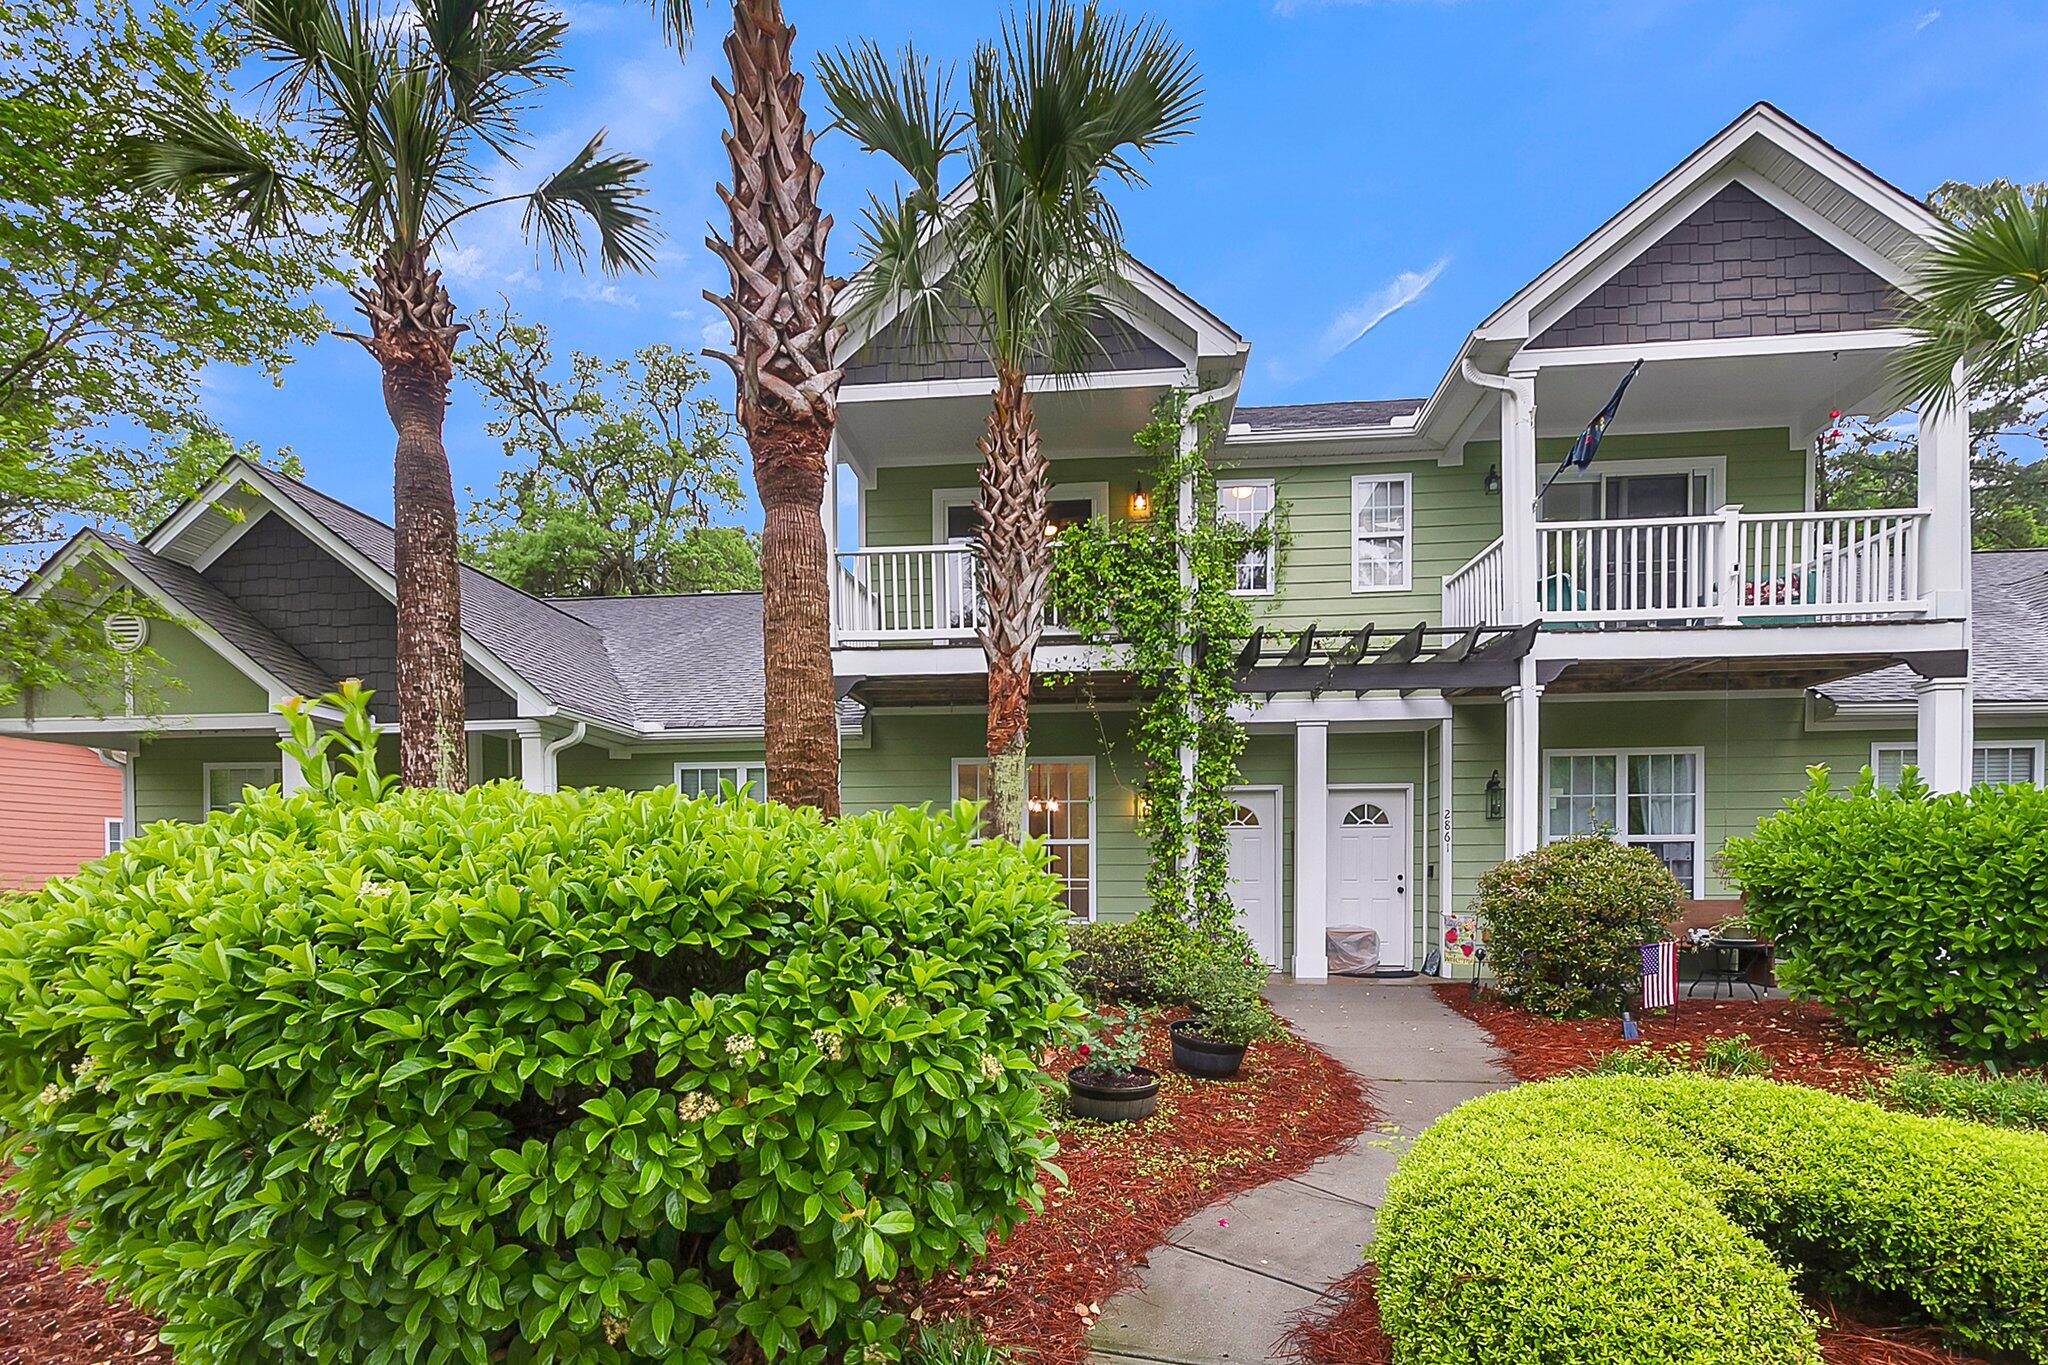 View Johns Island, SC 29455 townhome